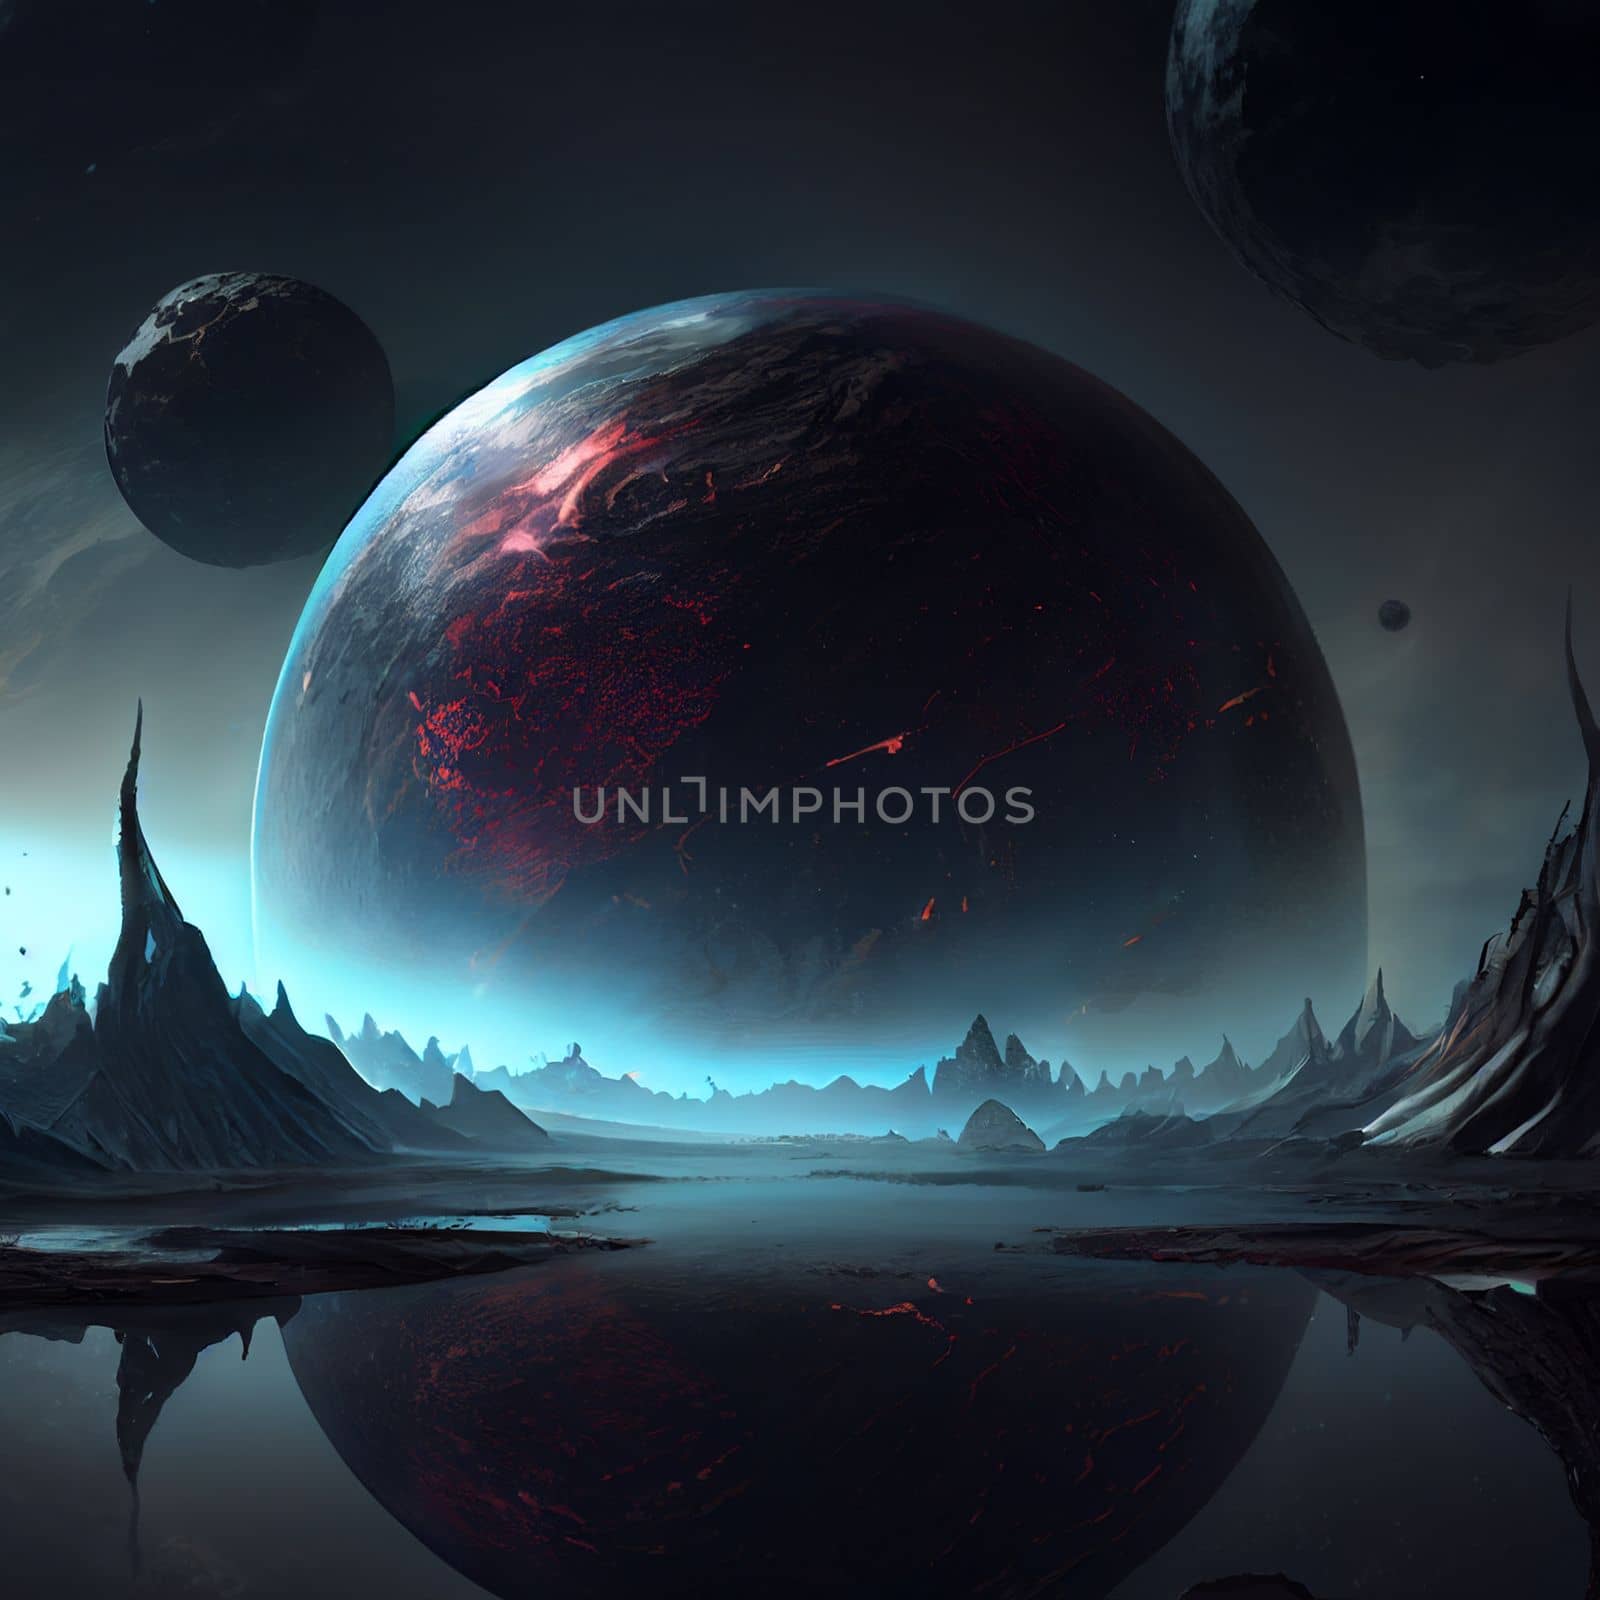 Dark planet landscape with flying planets in the sky by studiodav